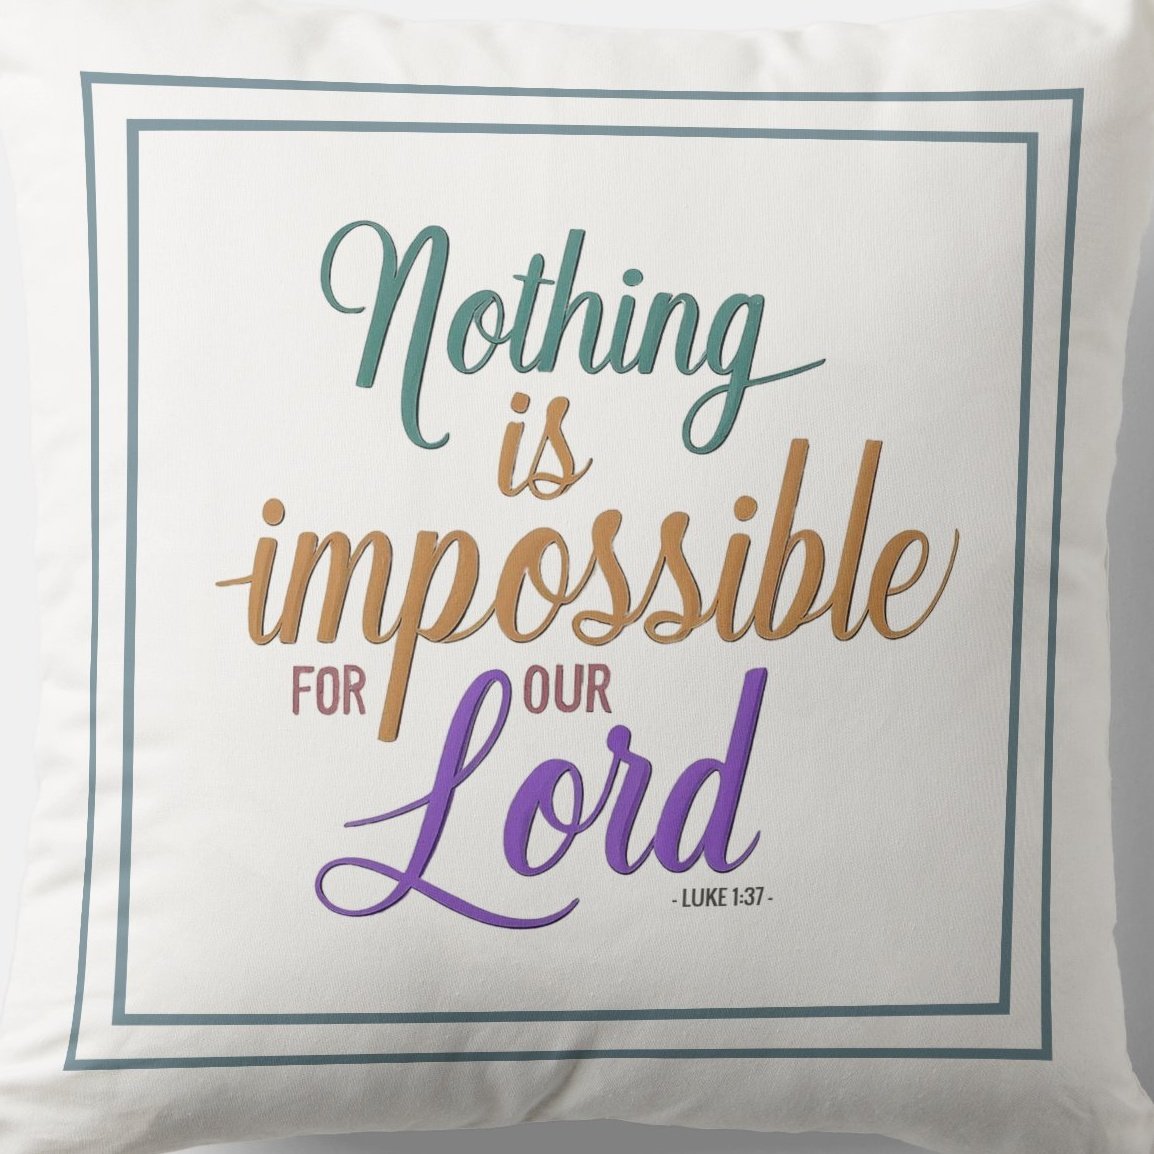 Nothing Is Impossible For Our Lord zazzle.com/nothing_is_imp… Luke 1-37 #Pillow #Blessing #JesusChrist #JesusSaves #Jesus #christian #spiritual #Homedecoration #uniquegift #giftideas #MothersDayGifts #giftformom #giftidea #HolySpirit #pillows #giftshop #giftsforher #giftsformom #god